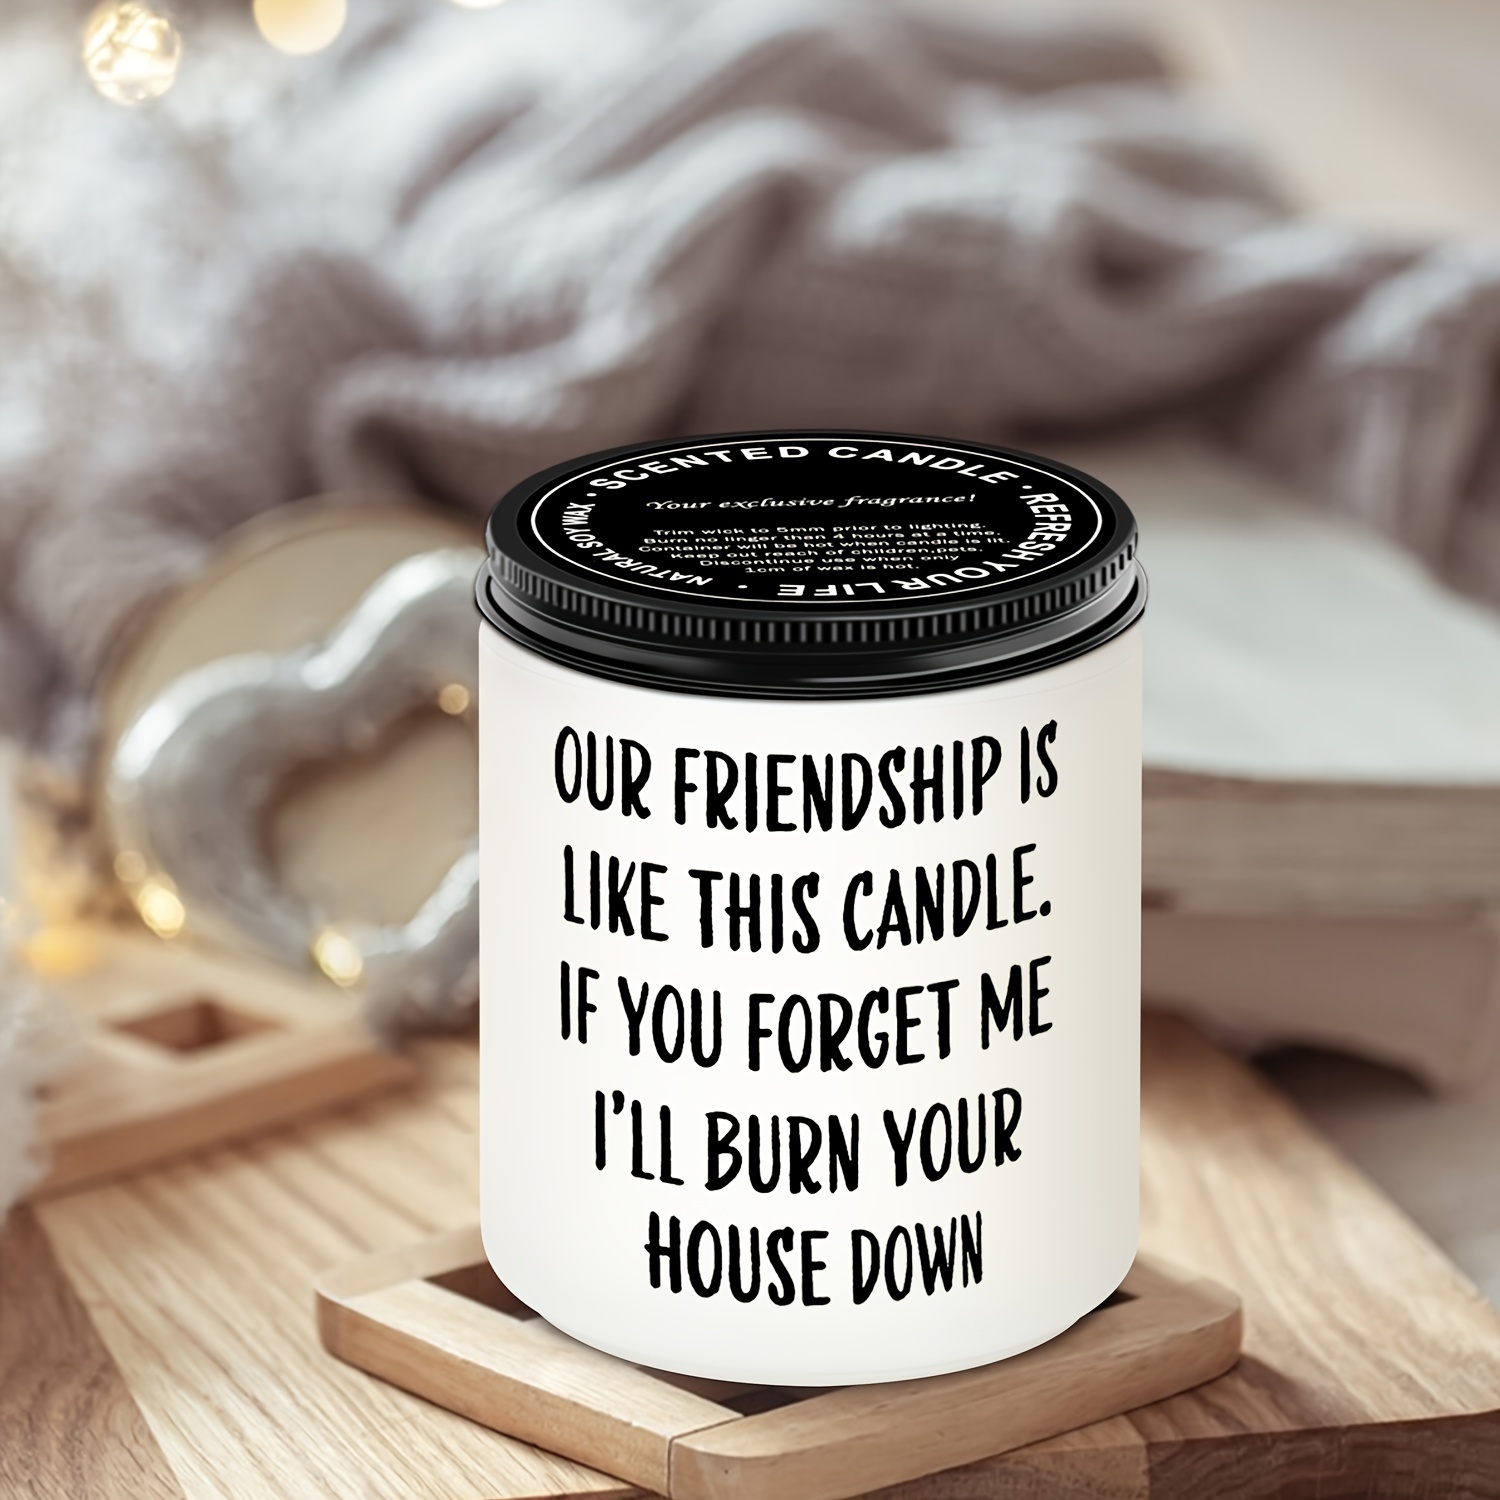 

1pc Friend Gifts For Women, Friendship Gifts For Women Friend, Funny Gifts For Women, Best Friend Birthday Christmas Gifts For Women Friends Female, Gag Gifts, Our Friendship Candle